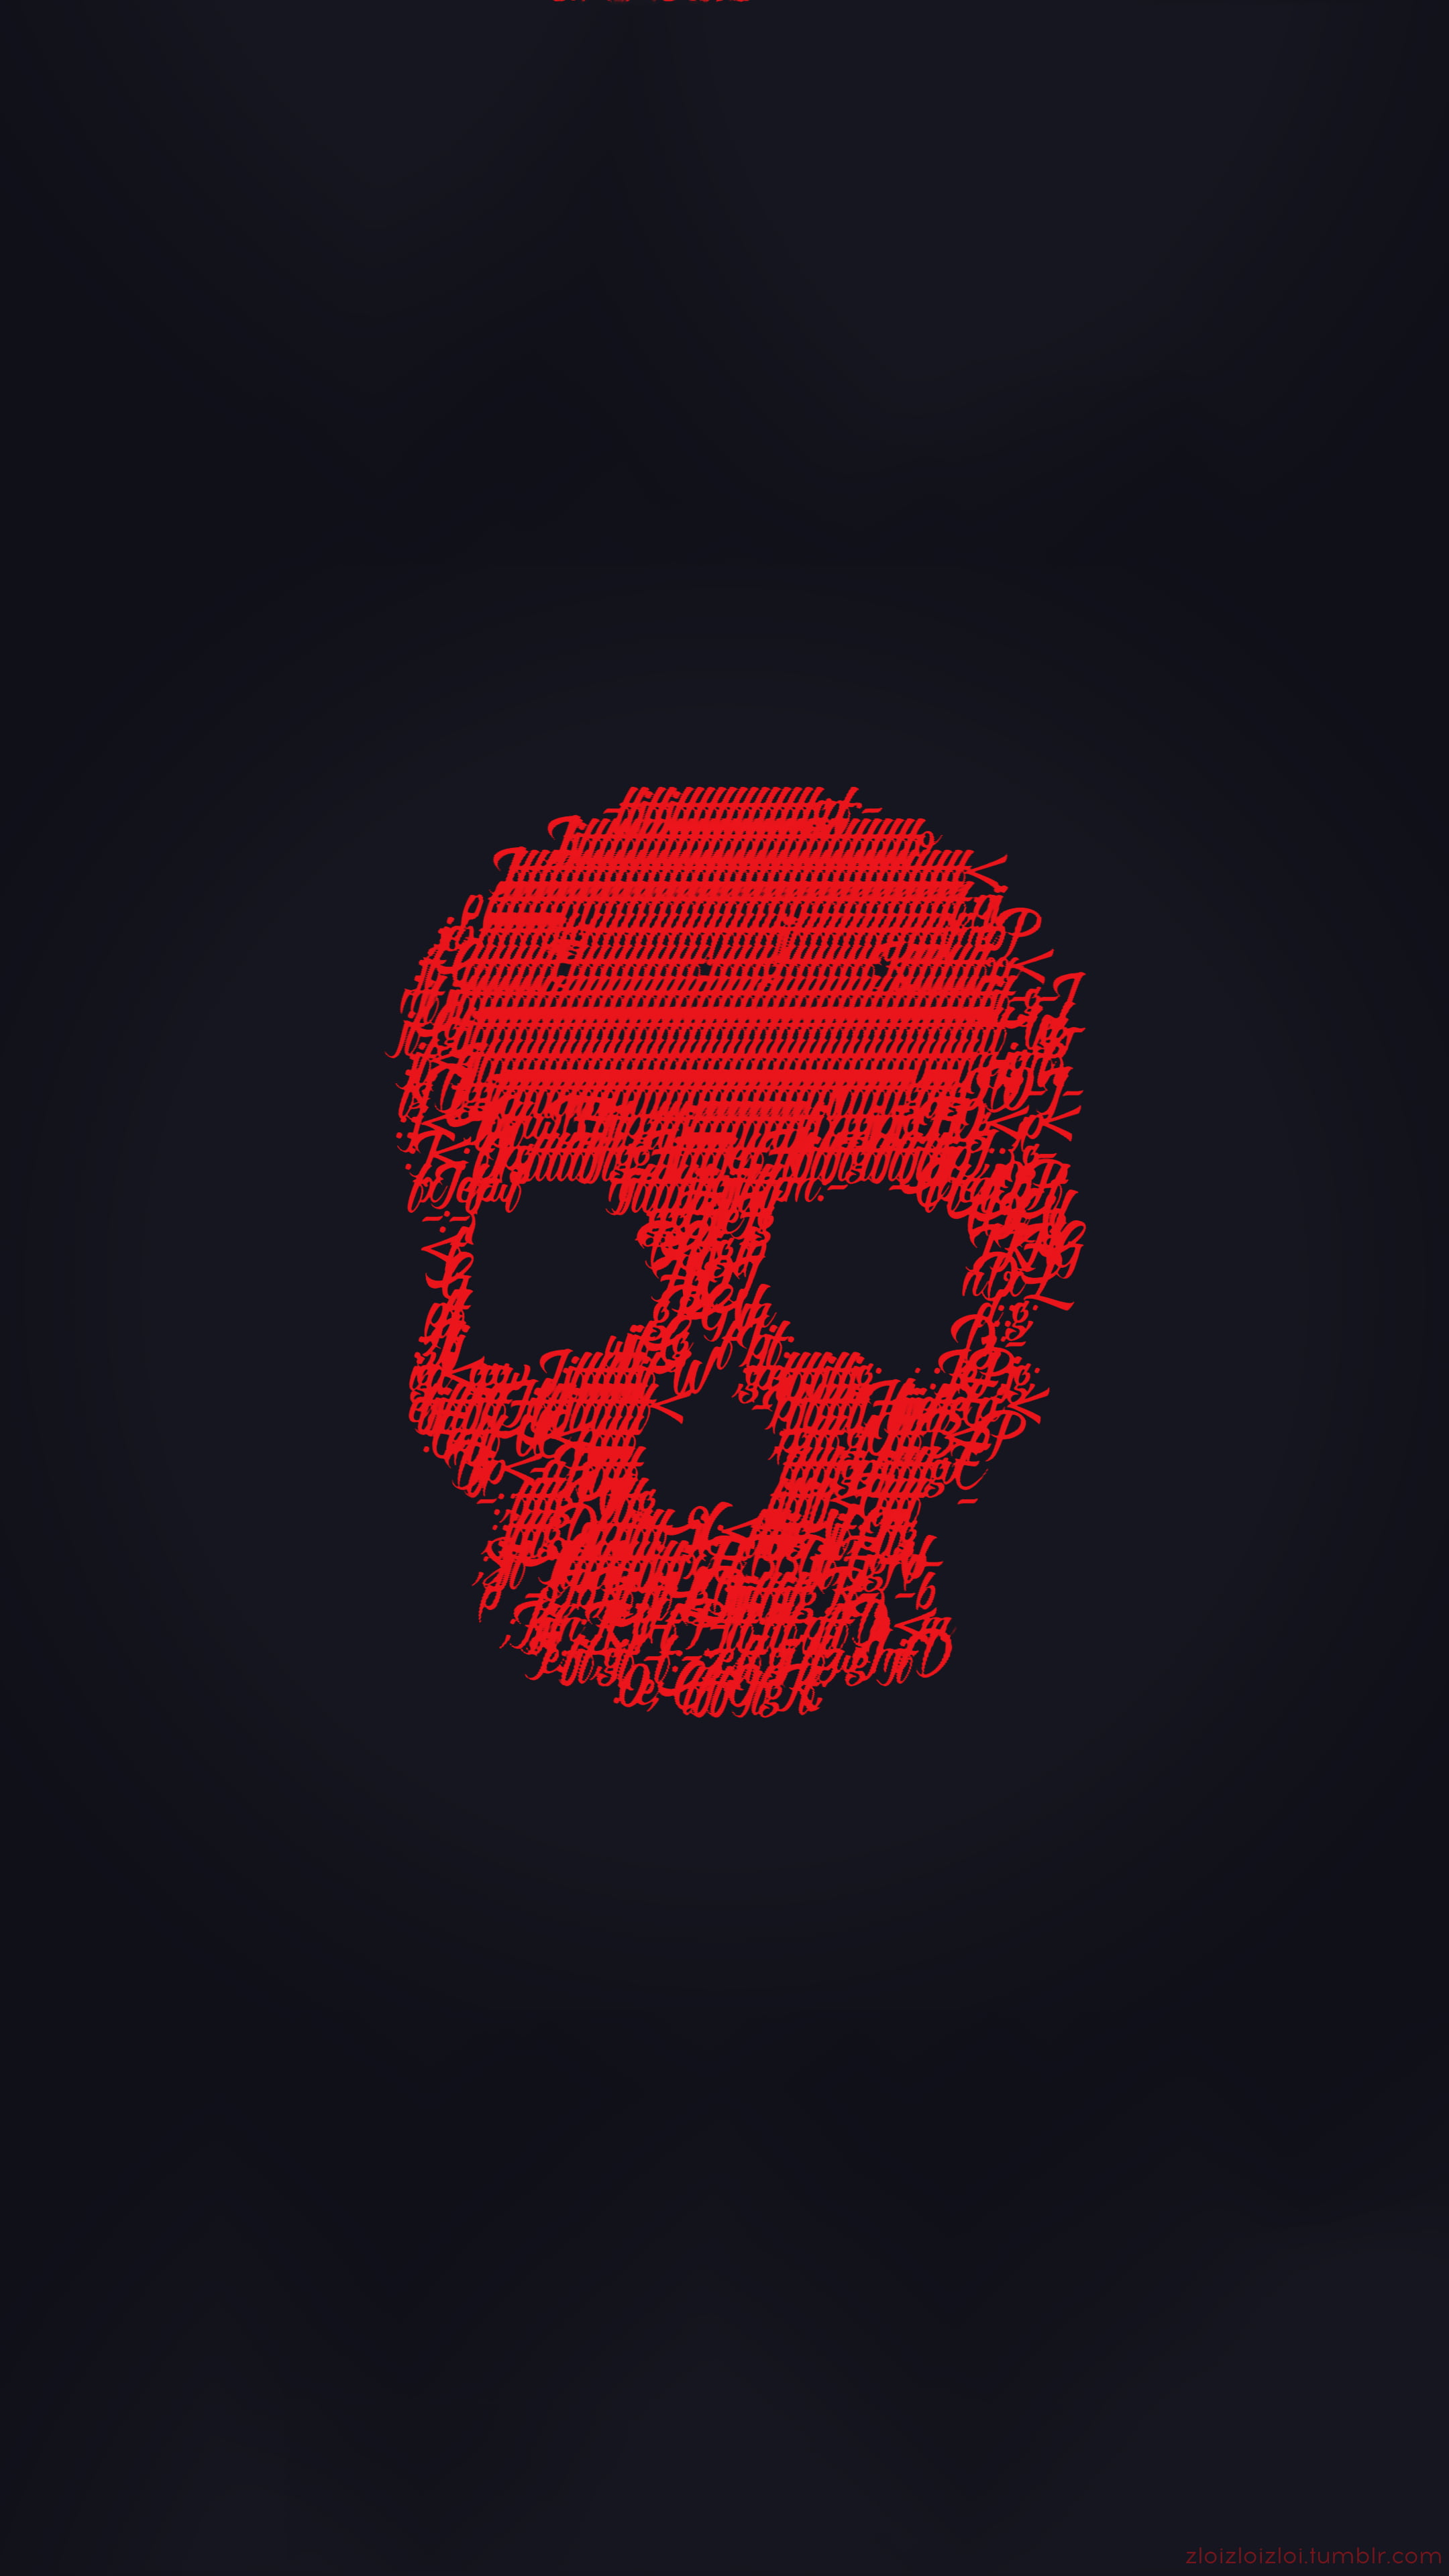 red and black knitted decor, skull, ASCII art, abstract, glitch art